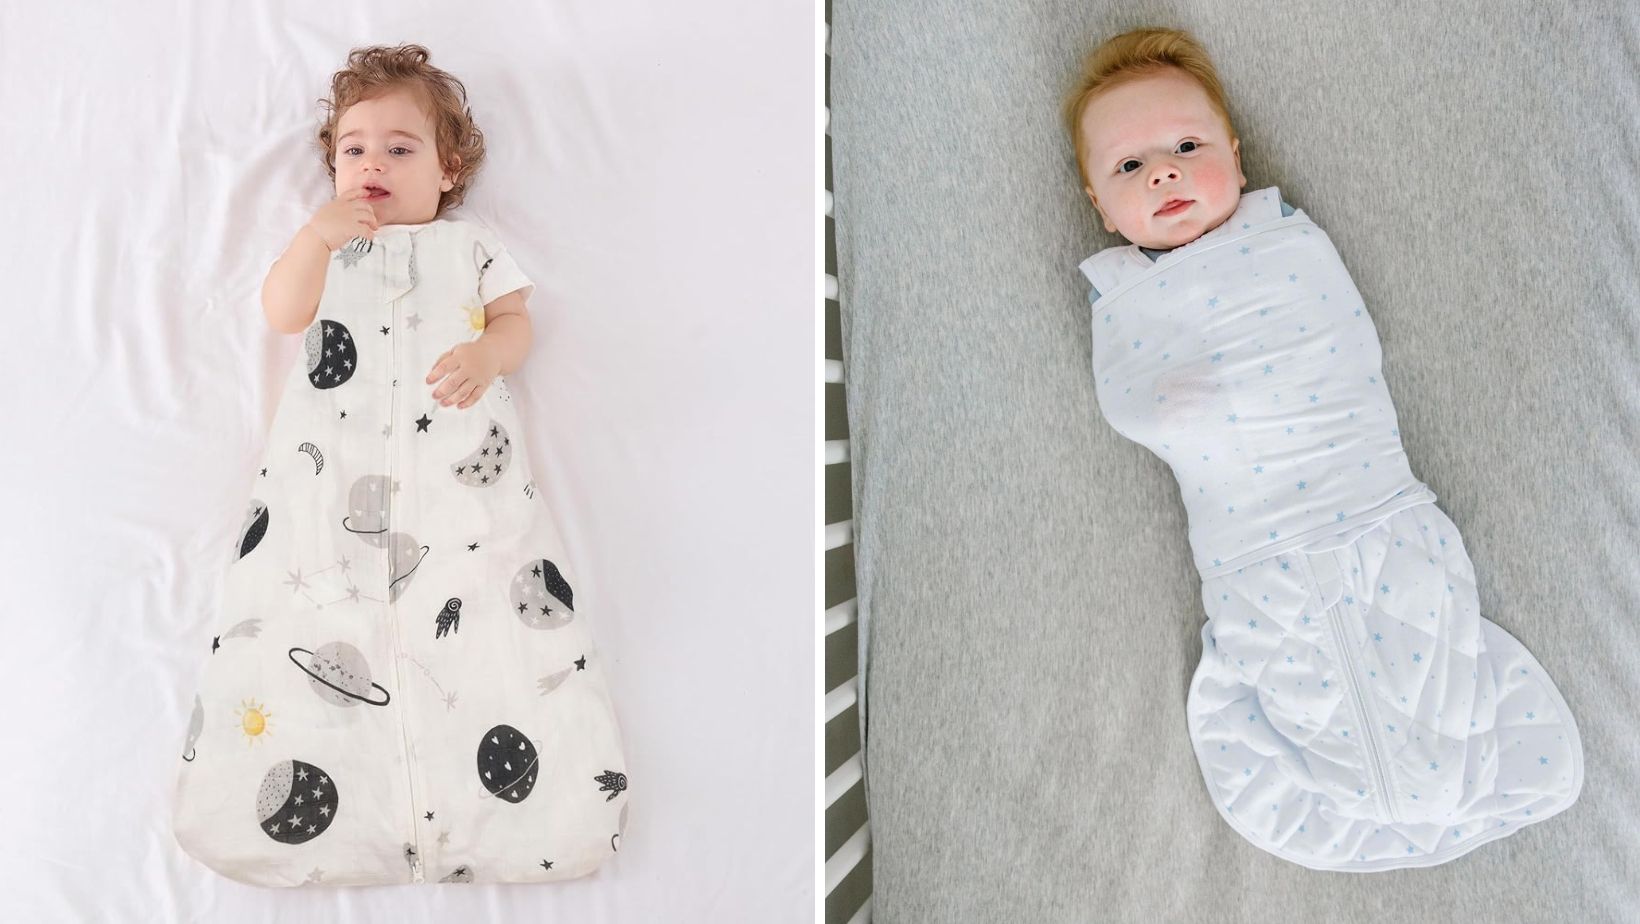 Two babies wrapped in different sleep sacks.